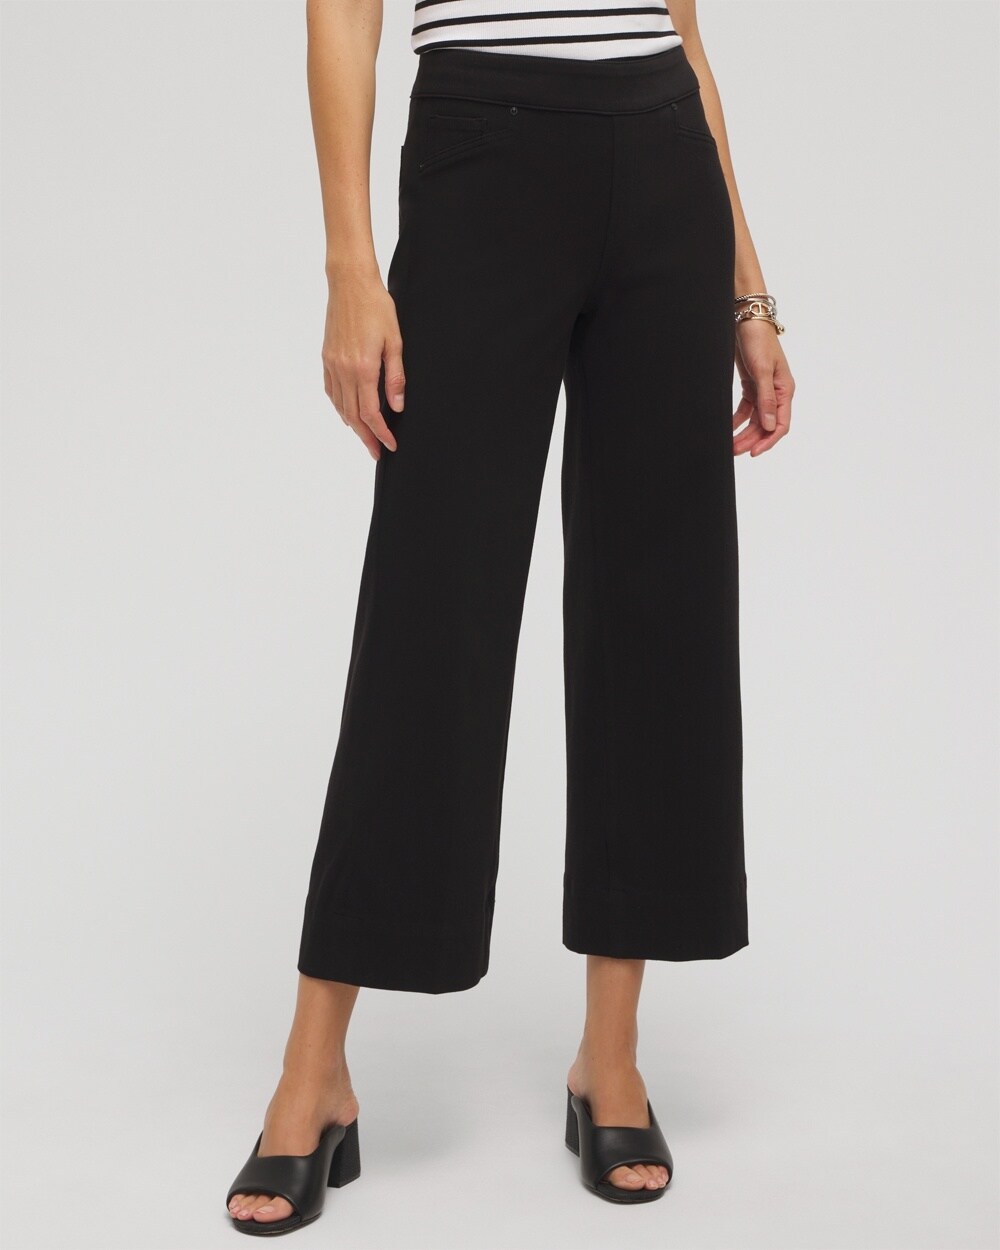 Chico's Travelers Pull On Cropped Jeans In Black Size 14p |  Travel Clothing